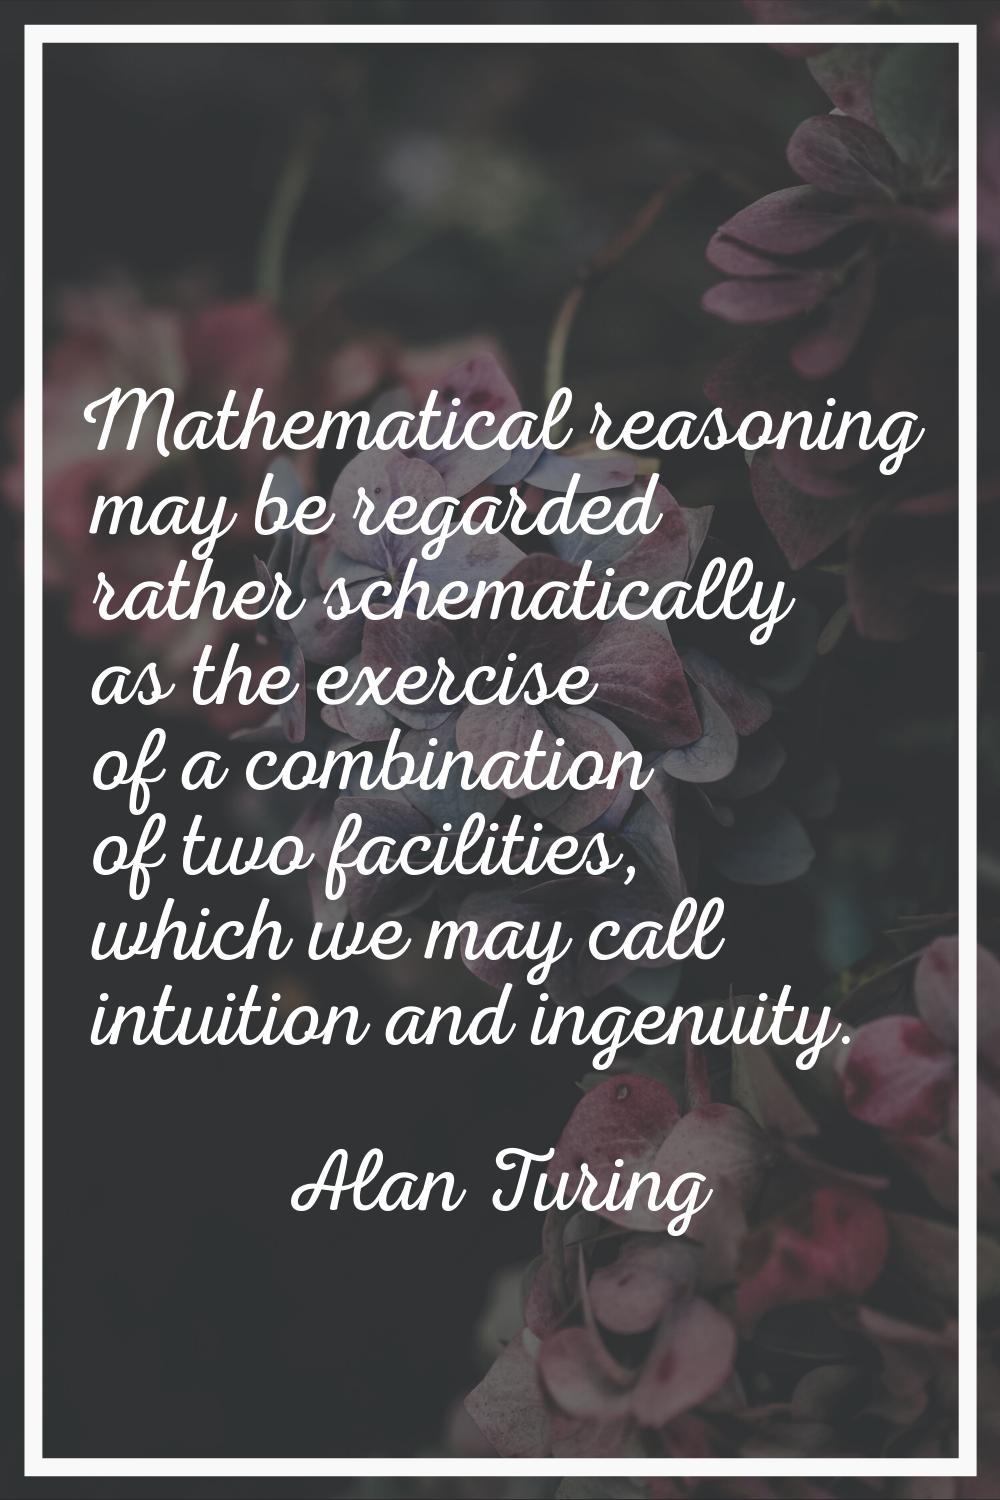 Mathematical reasoning may be regarded rather schematically as the exercise of a combination of two